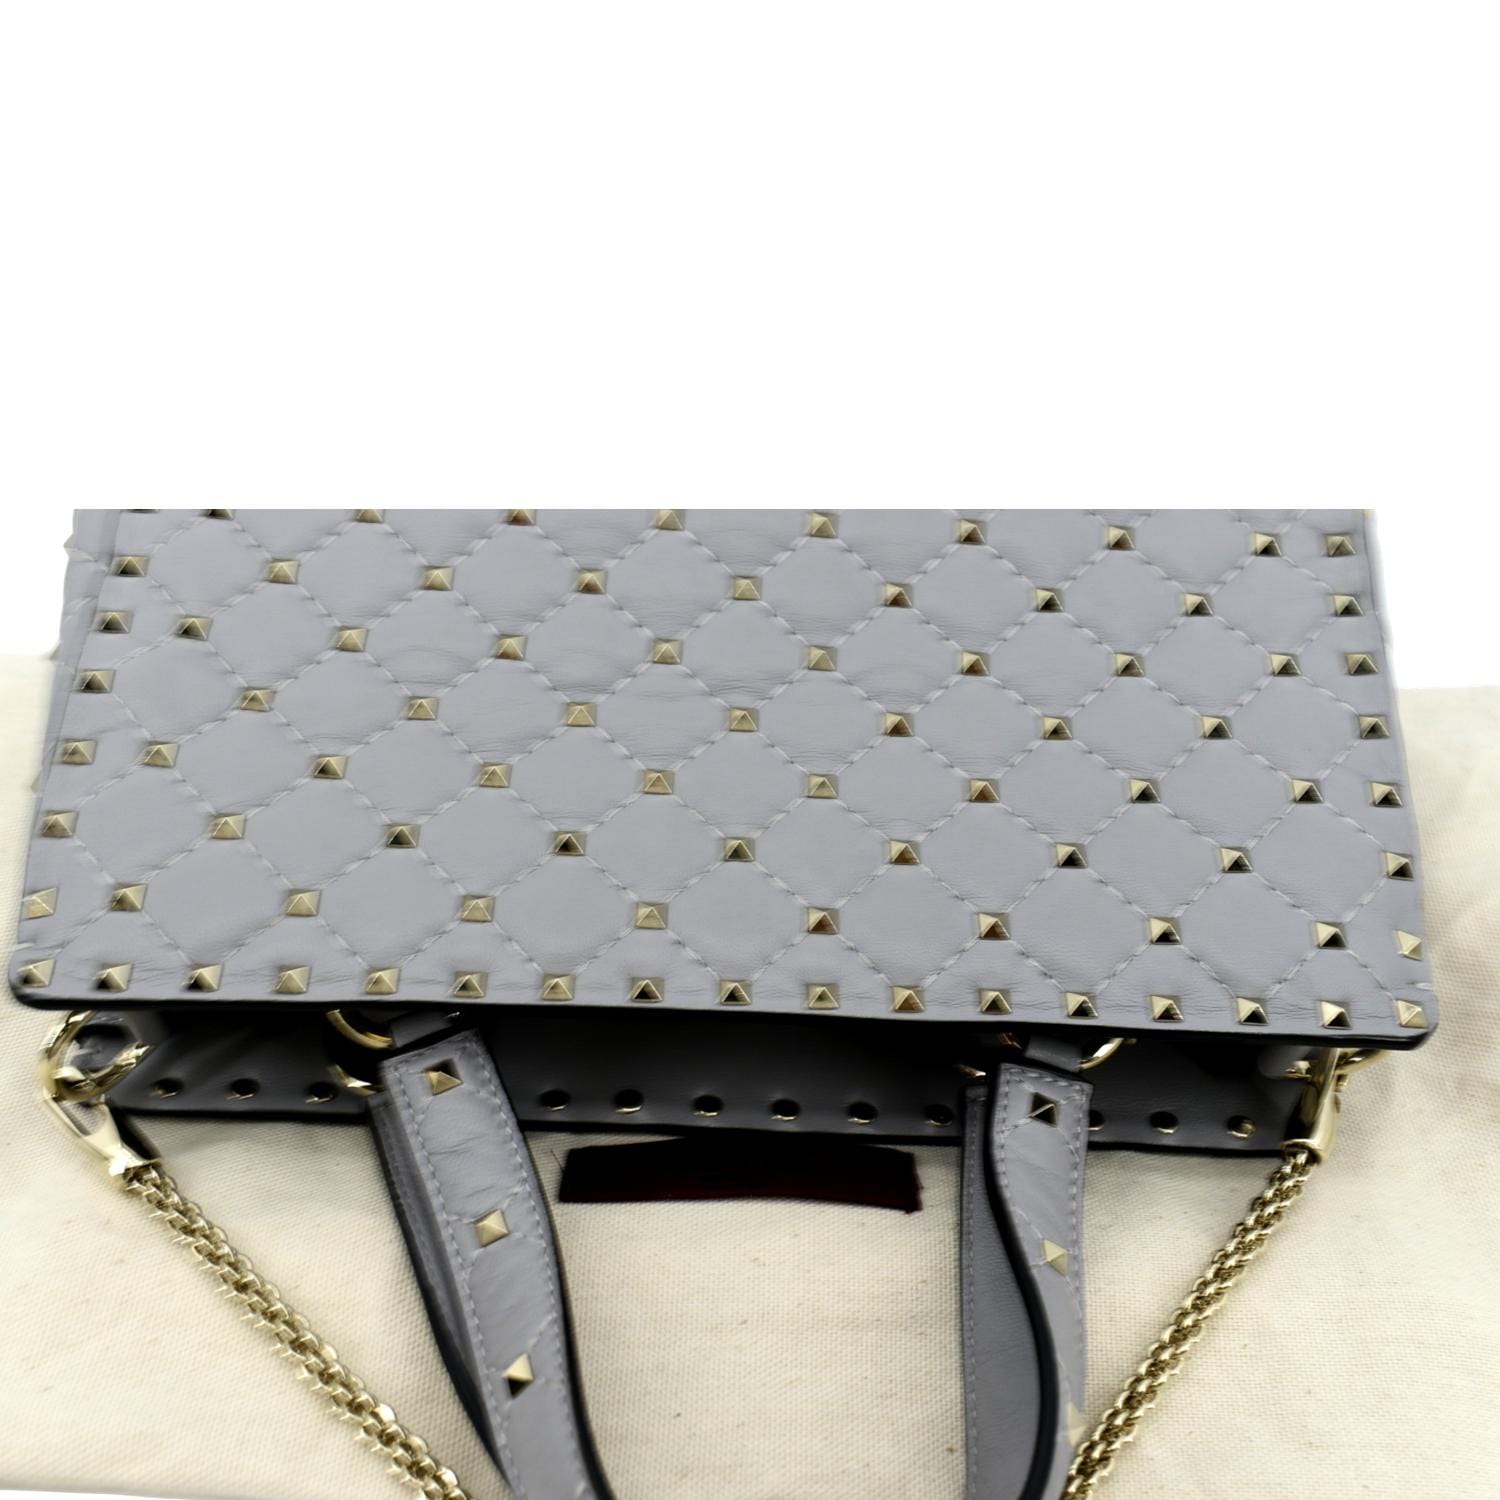 Valentino Rockstud Tote Review 